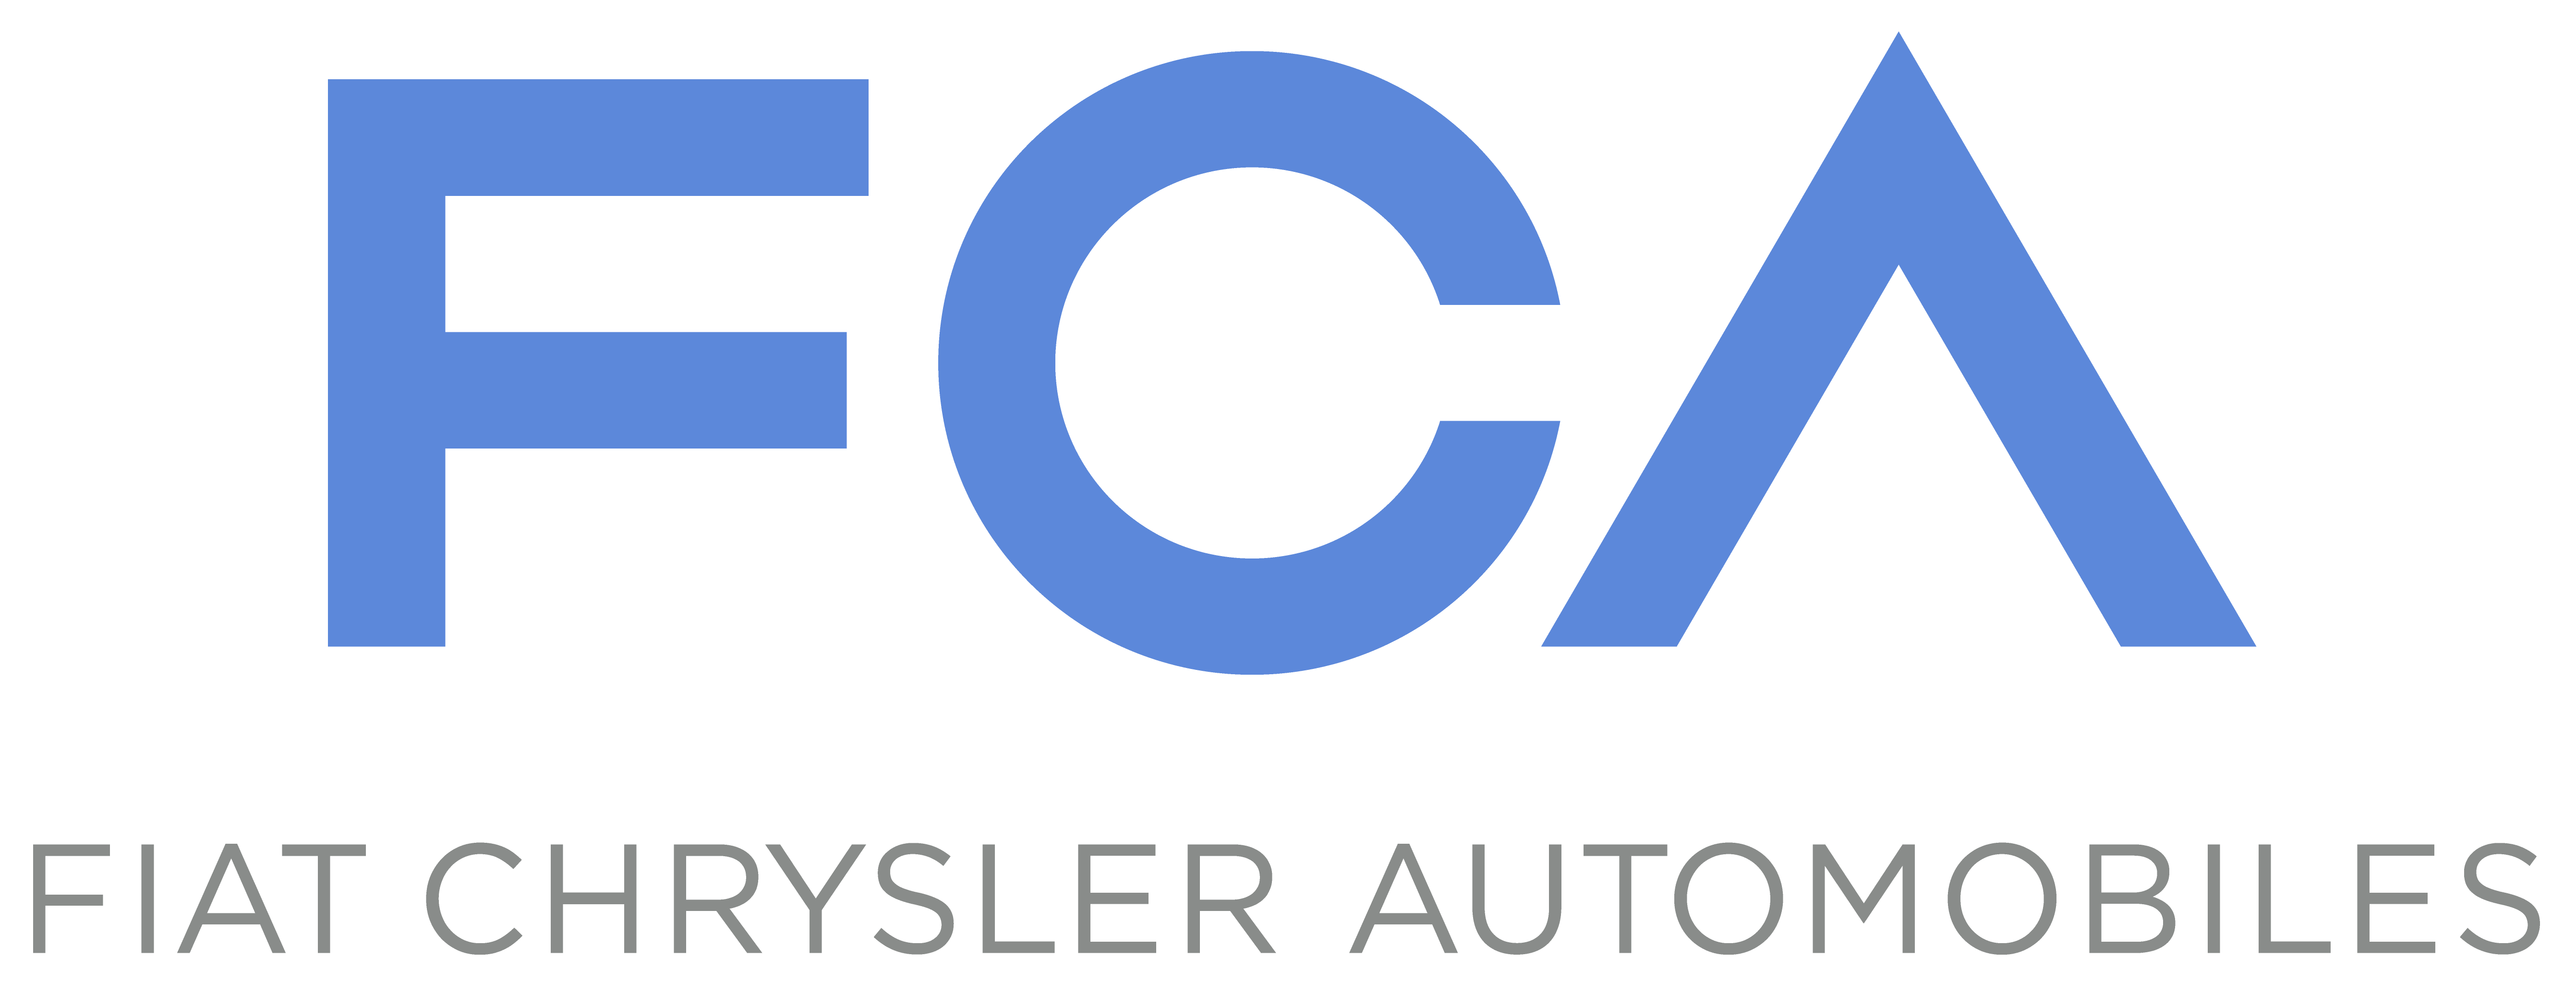 The FCA logo has been updated